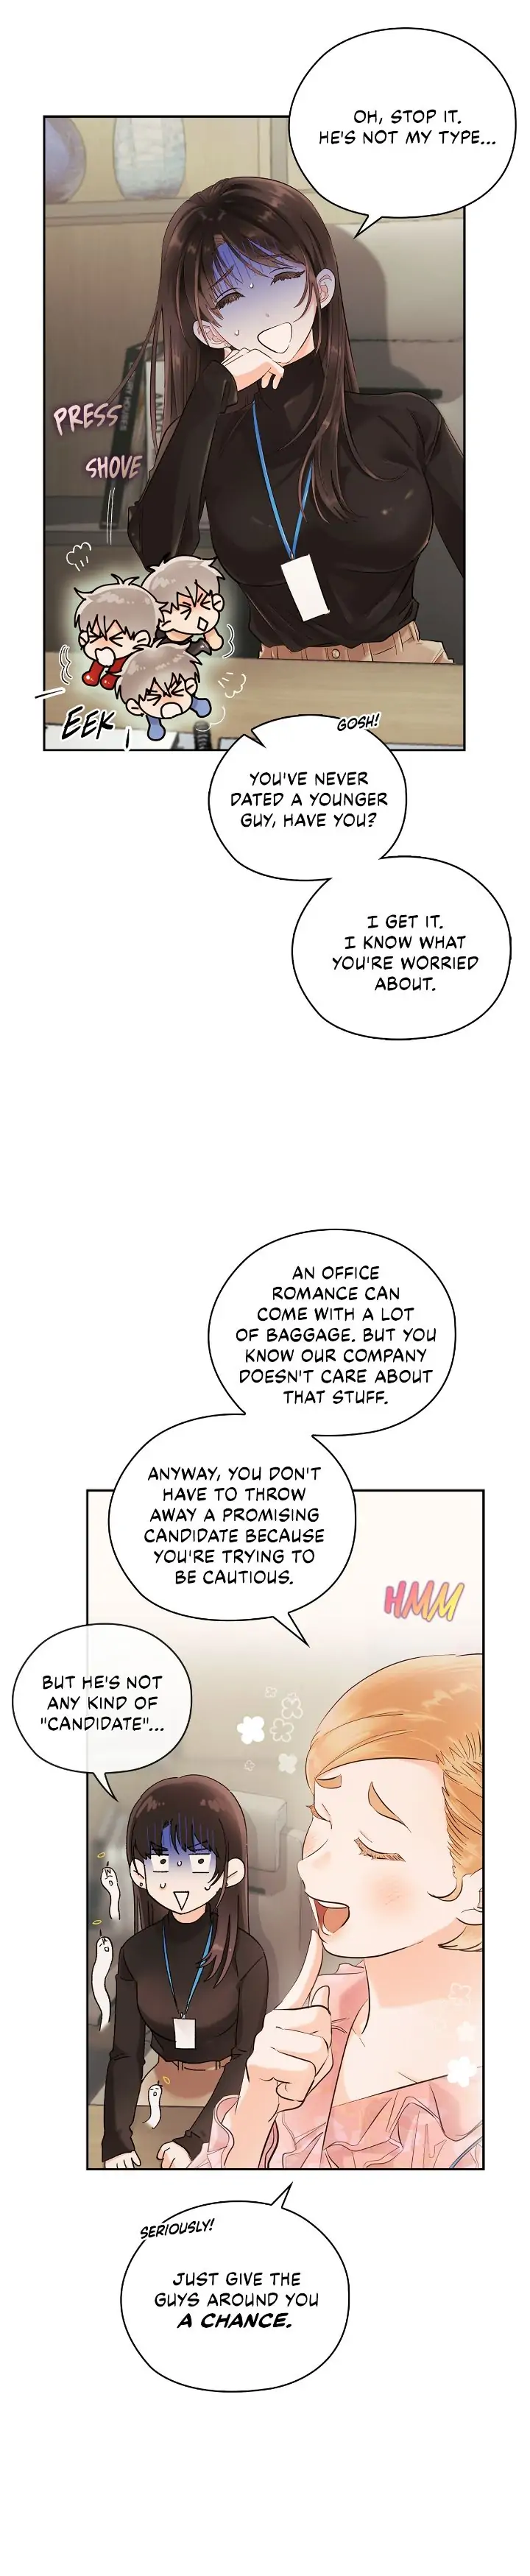 Quiet in the Office! chapter 11